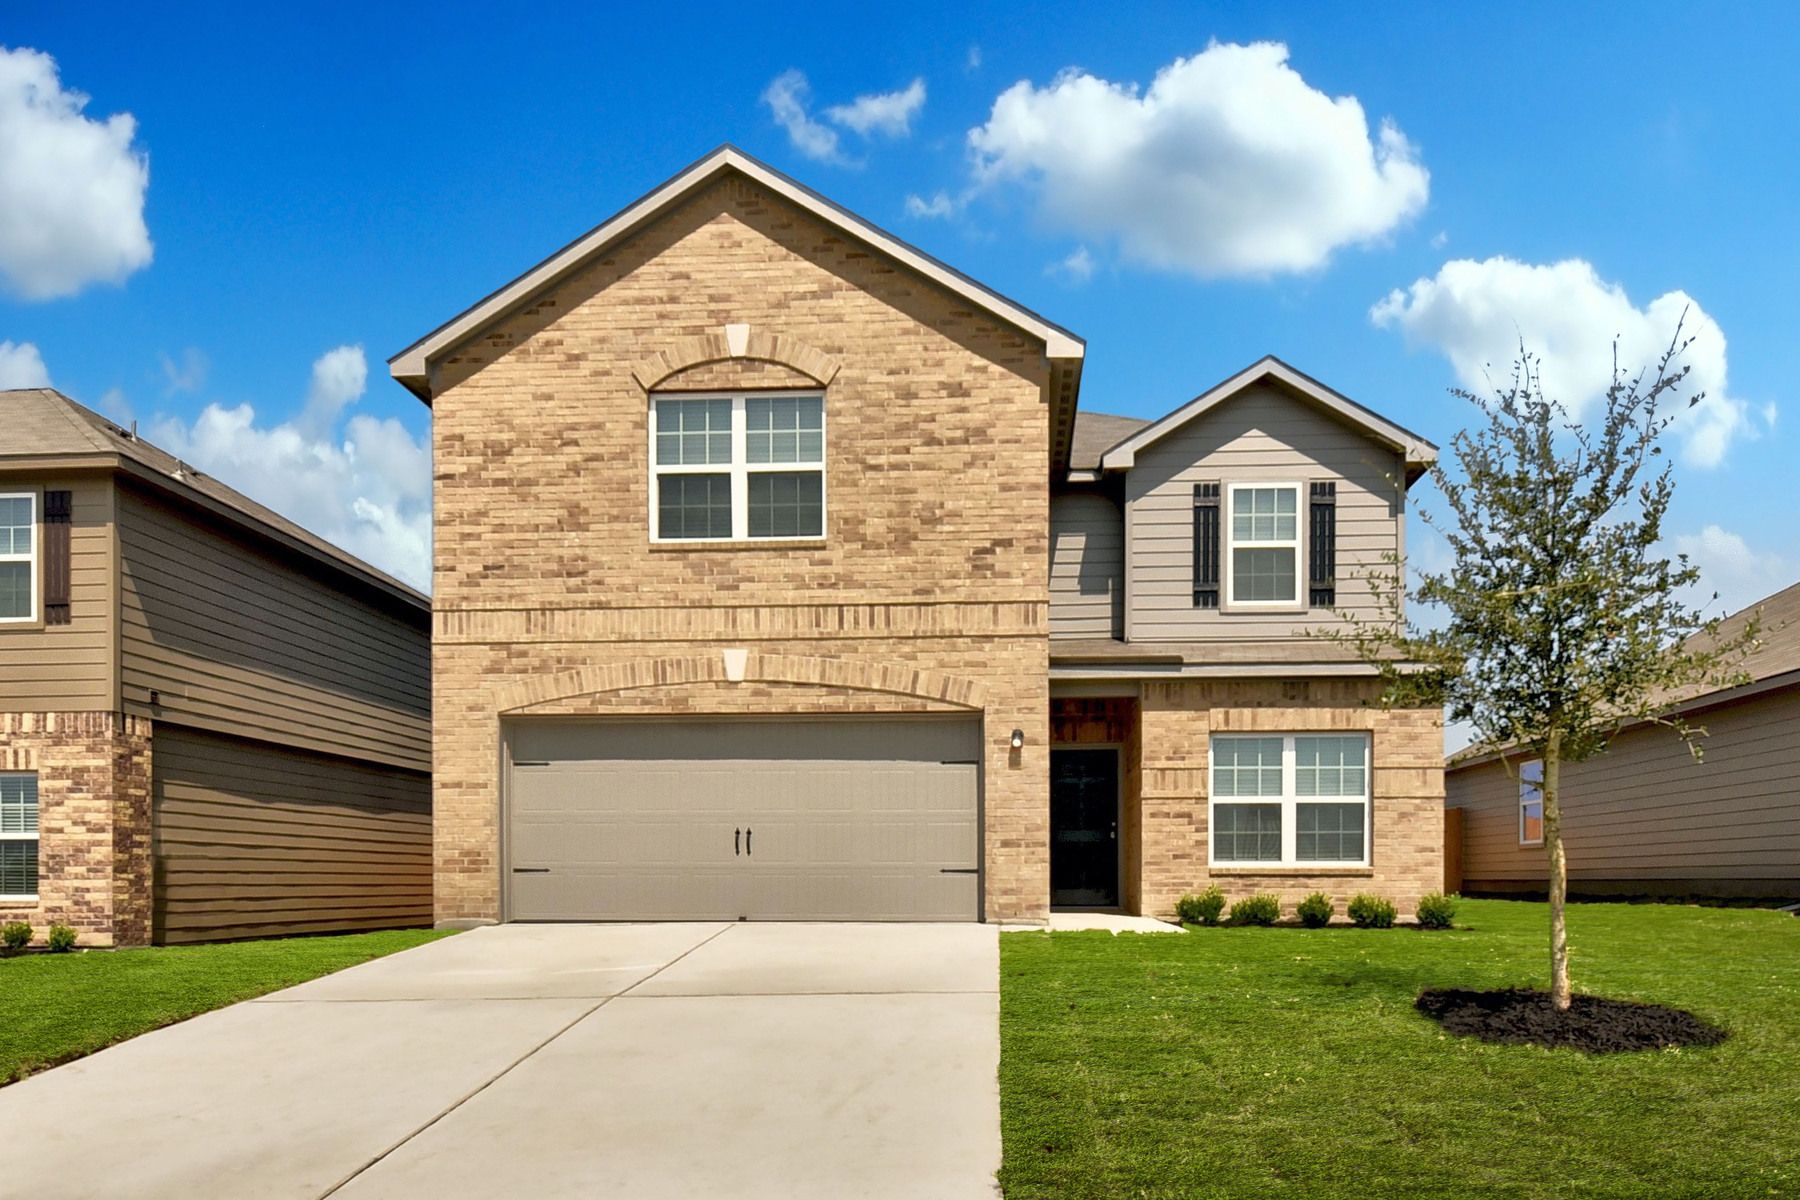 LGI Homes at Homestead Estates:The spacious Travis plan is available now.